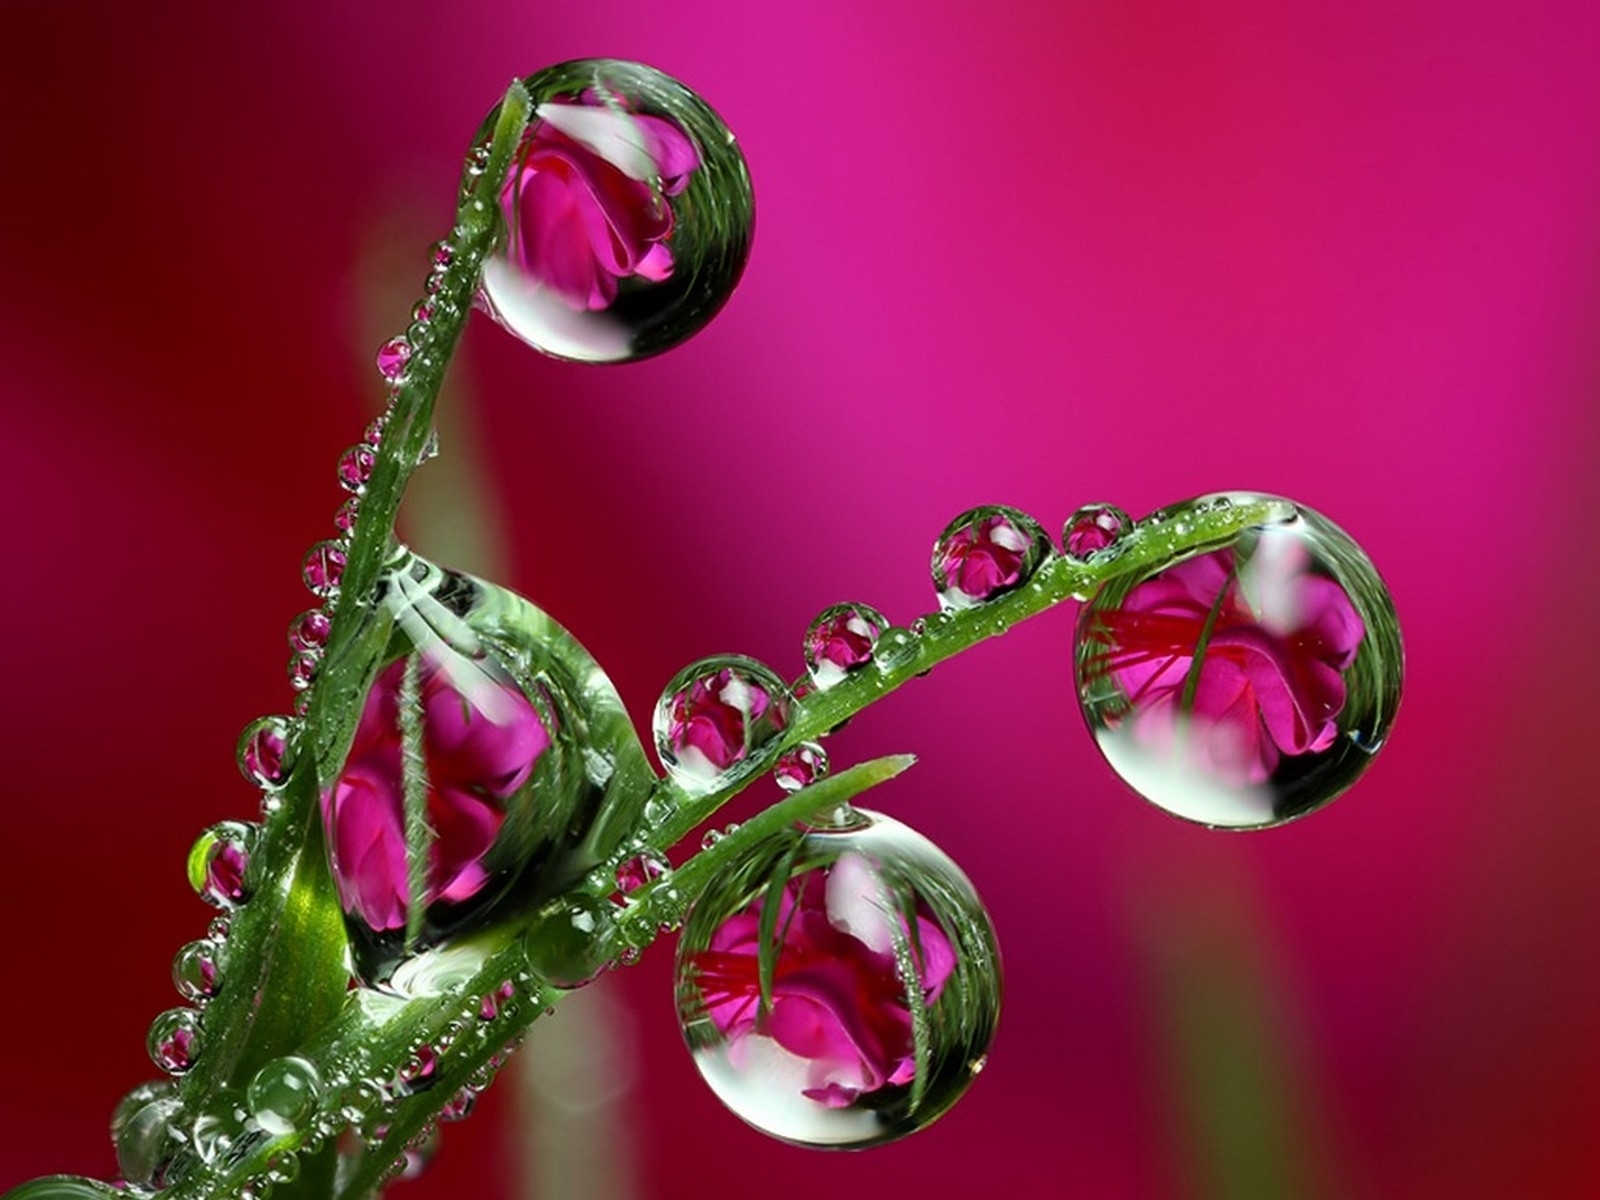 drops, plants, red 2160p